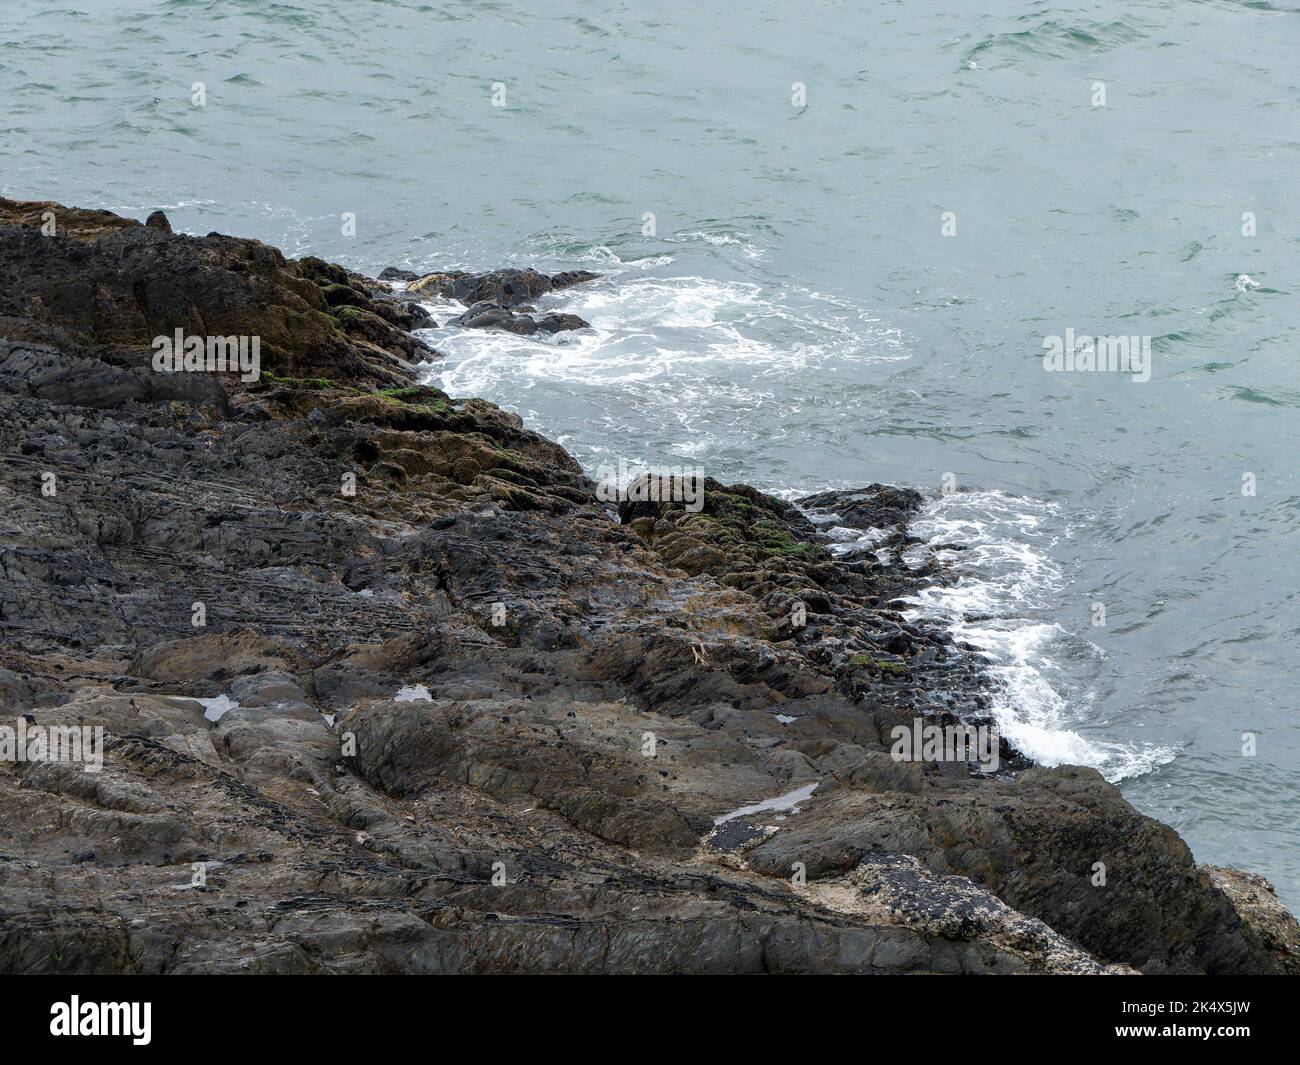 Cold sea water and coastal rocks. Cloudy weather on the coast. Surf and white sea foam, rock formation beside body of water. Stock Photo